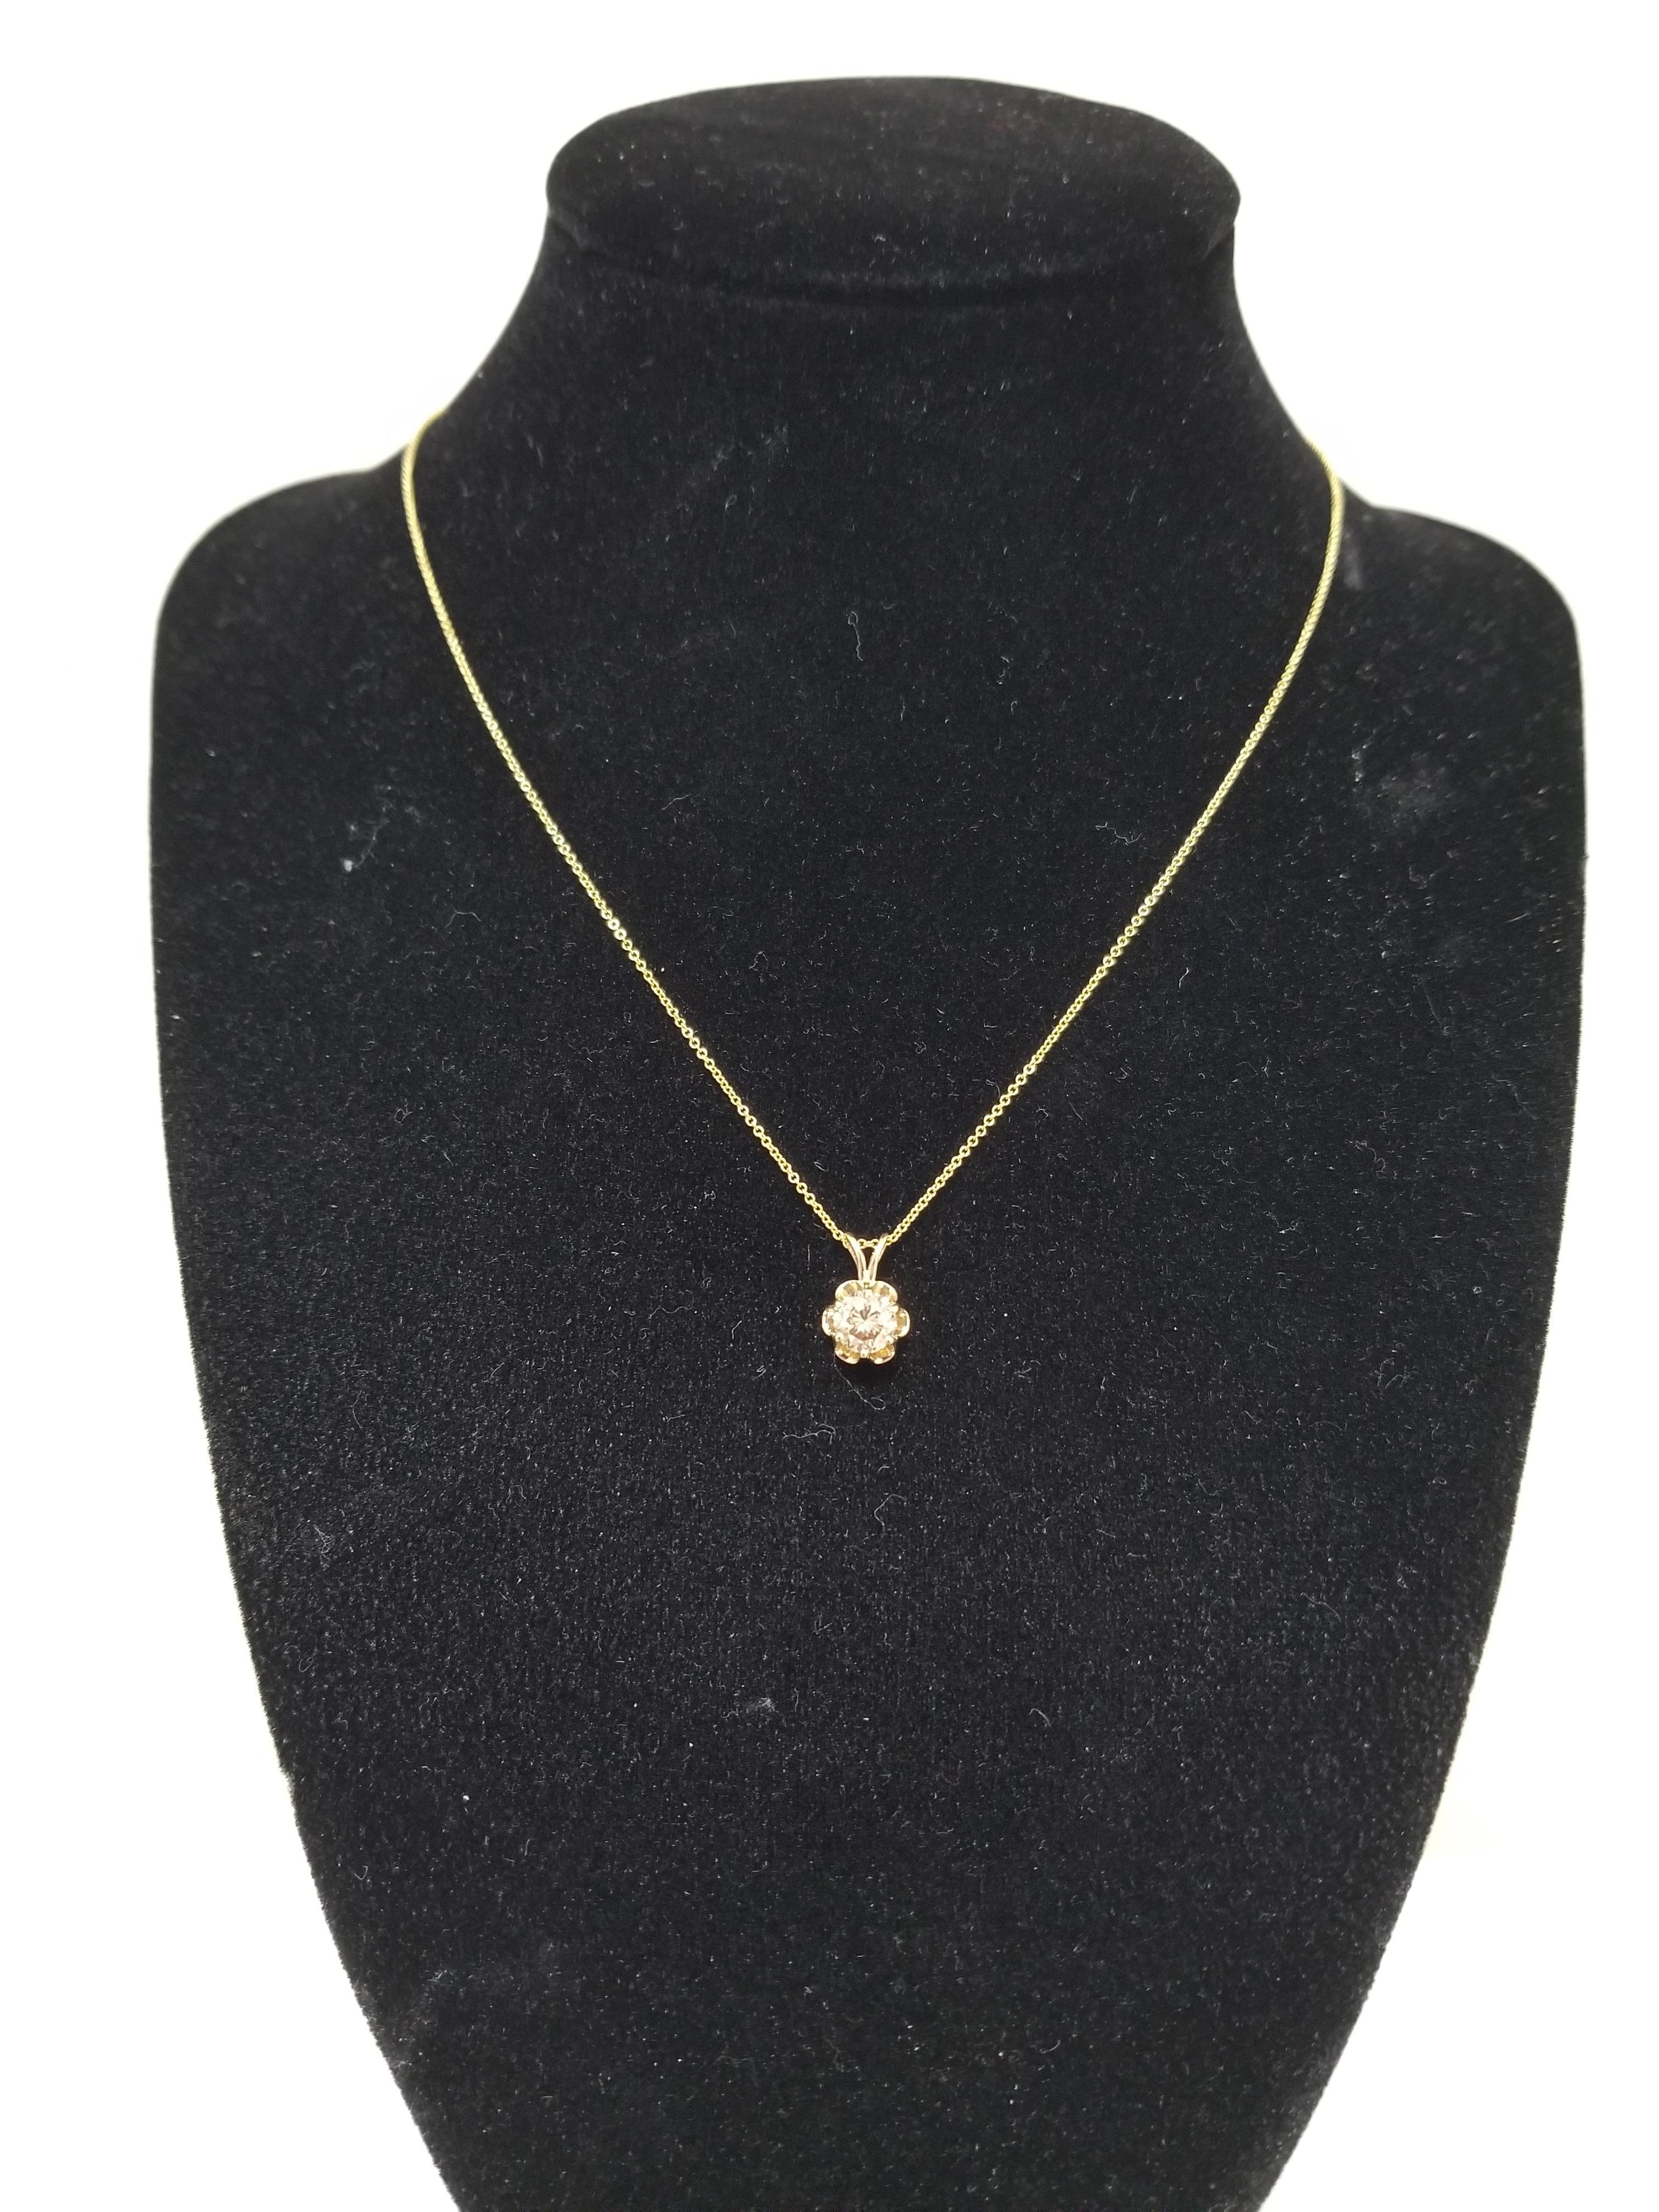 0.80 carat round brilliant cut diamond solitaire set in a beautiful 14 karat yellow gold buttercup design.  Pendant measures approximately 0.5 inch length and 0.25 inch wide. 

(Pendant Only - Chain sold separately)